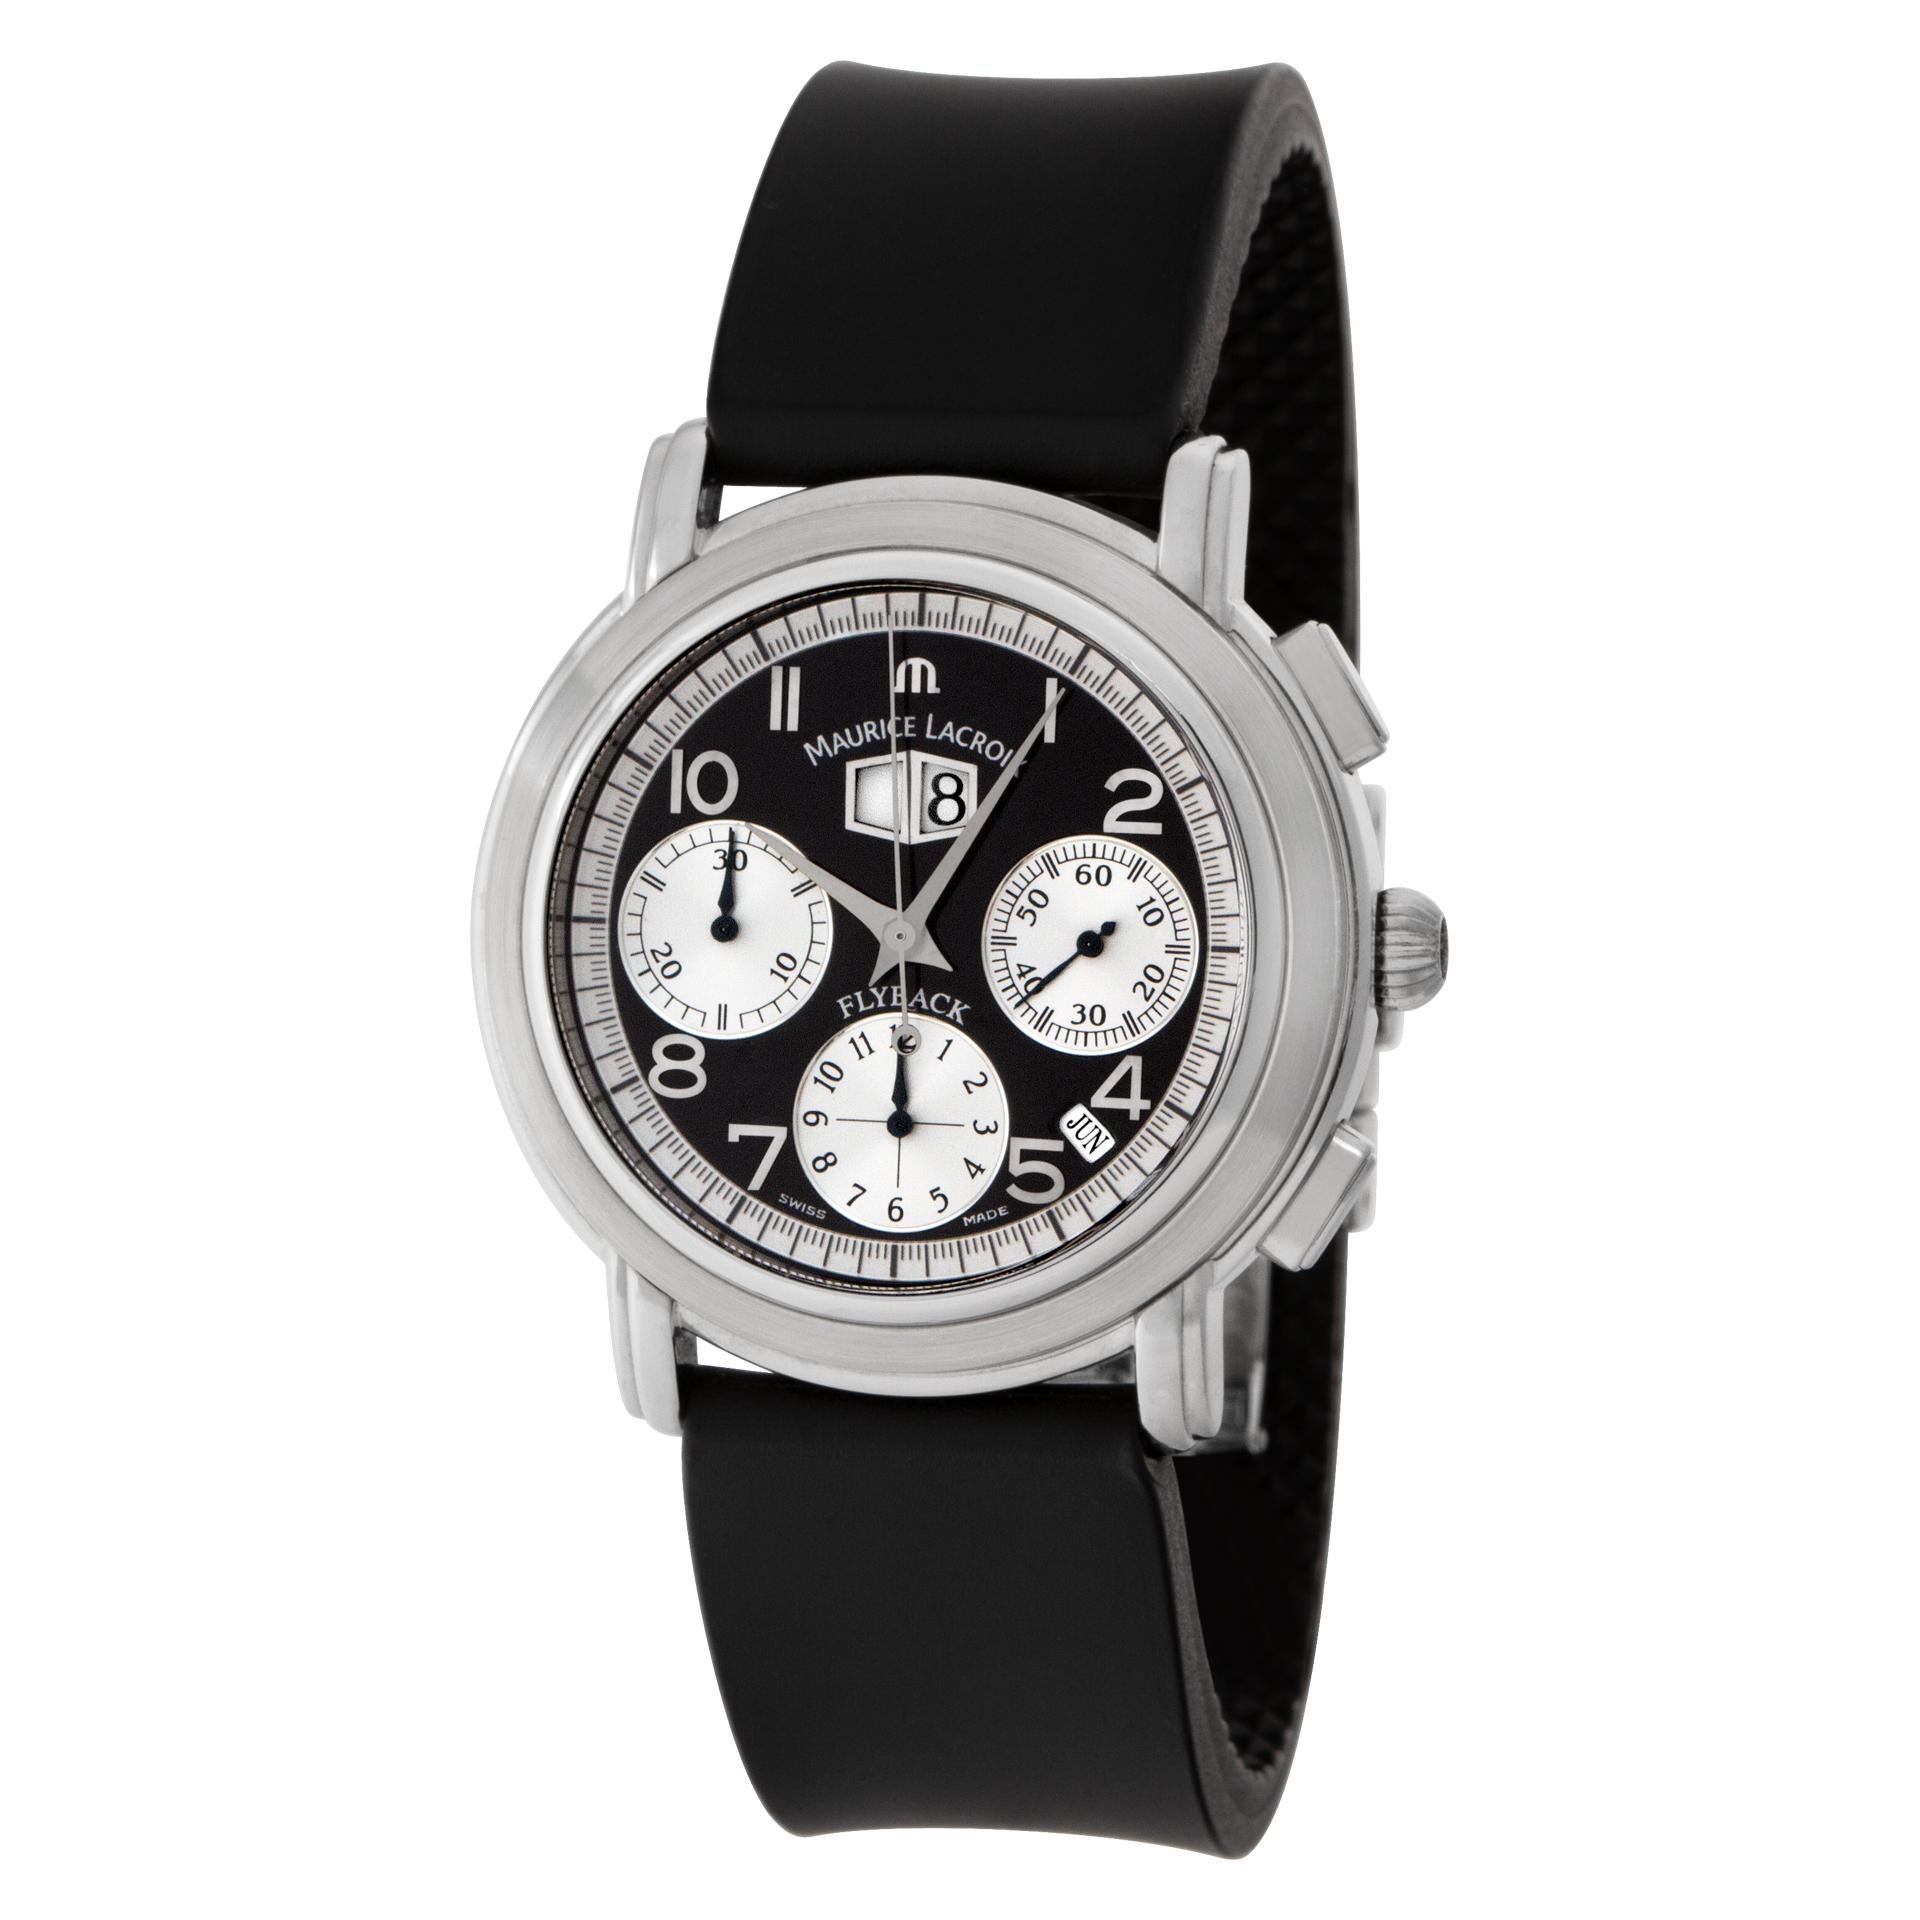 Maurice Lacroix Flyback Chrono in stainless steel on a rubber strap wih deployant buckle. Auto w/ subseconds, date, month and chronograph. 40 mm case size. Ref mp6098-ss001-12e. Fine Pre-owned Maurice Lacroix Watch. Certified preowned Maurice